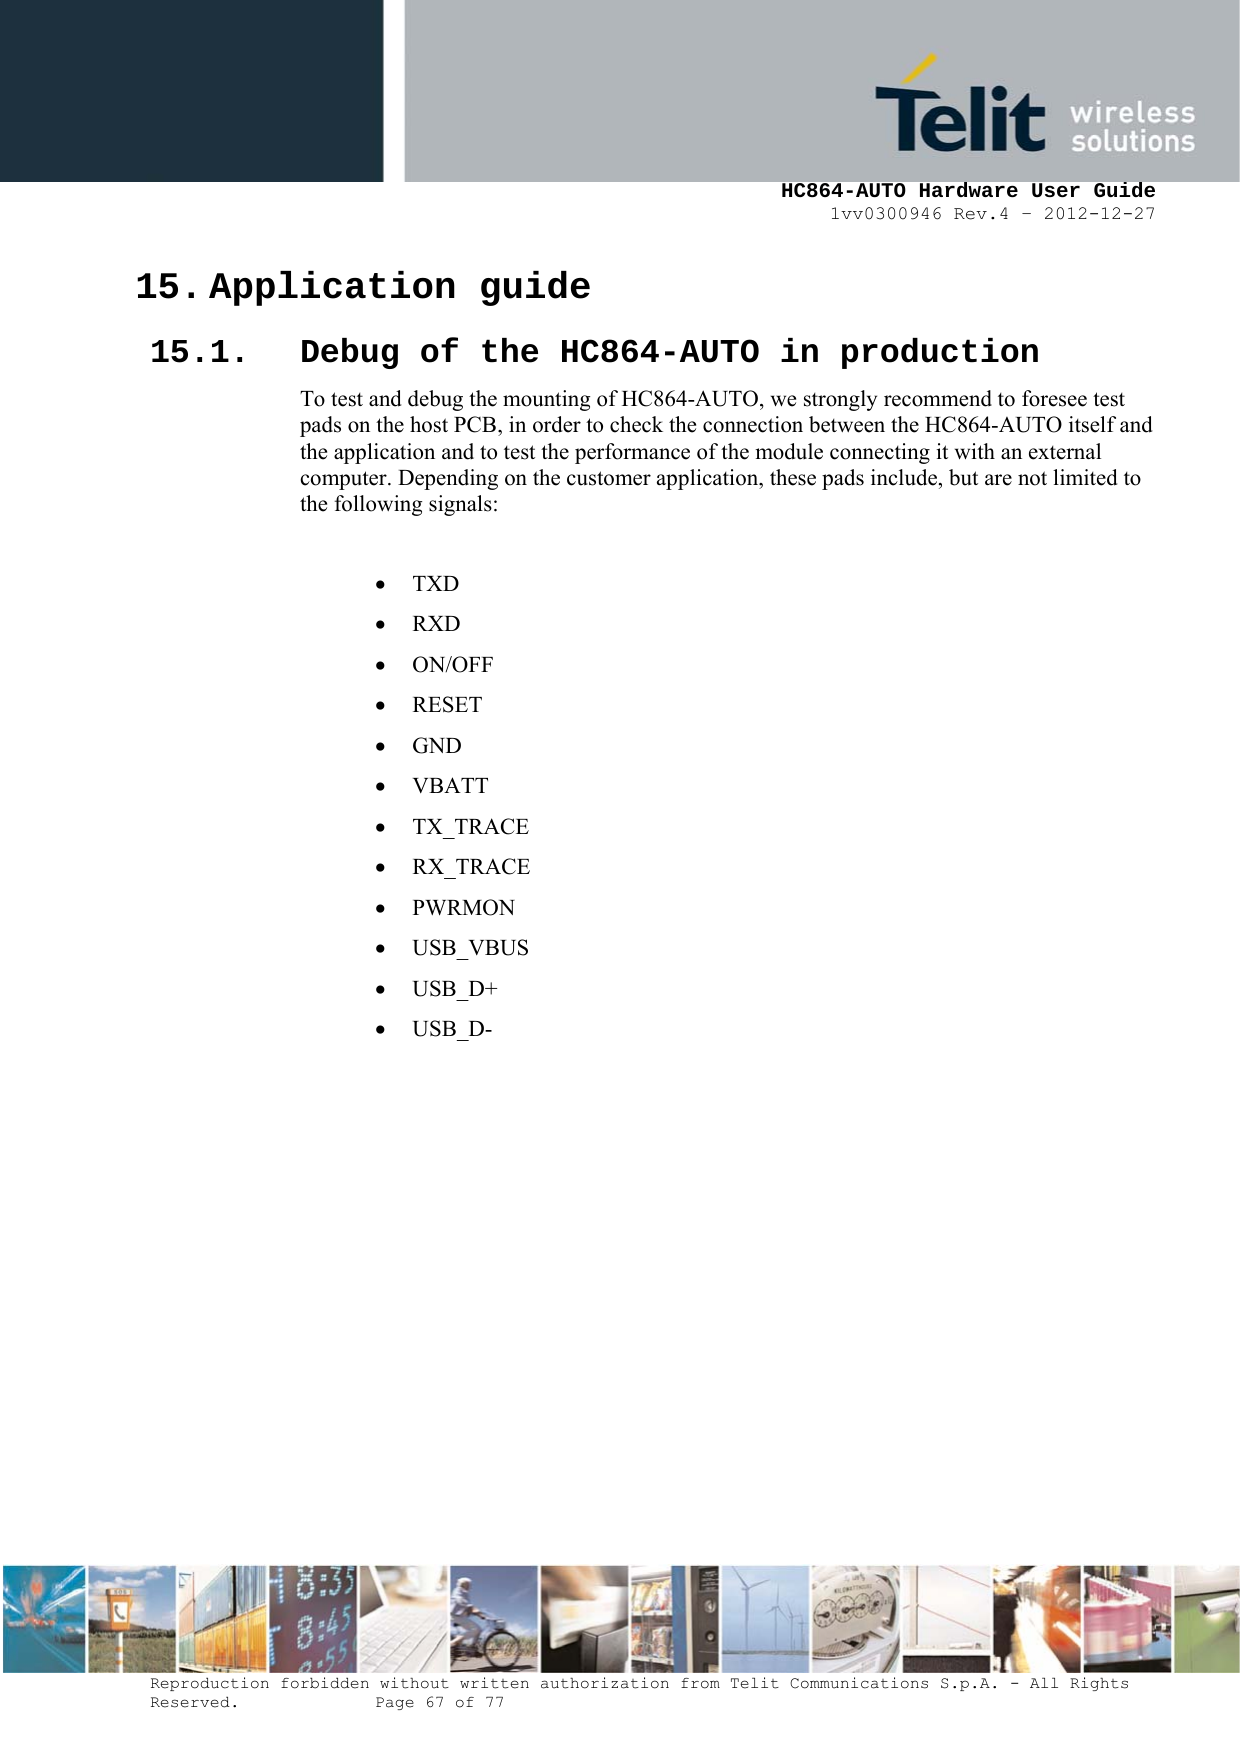     HC864-AUTO Hardware User Guide 1vv0300946 Rev.4 – 2012-12-27 Reproduction forbidden without written authorization from Telit Communications S.p.A. - All Rights Reserved.    Page 67 of 77  15. Application guide 15.1. Debug of the HC864-AUTO in production To test and debug the mounting of HC864-AUTO, we strongly recommend to foresee test pads on the host PCB, in order to check the connection between the HC864-AUTO itself and the application and to test the performance of the module connecting it with an external computer. Depending on the customer application, these pads include, but are not limited to the following signals:  • TXD • RXD • ON/OFF • RESET • GND • VBATT • TX_TRACE • RX_TRACE • PWRMON  • USB_VBUS • USB_D+ • USB_D- 